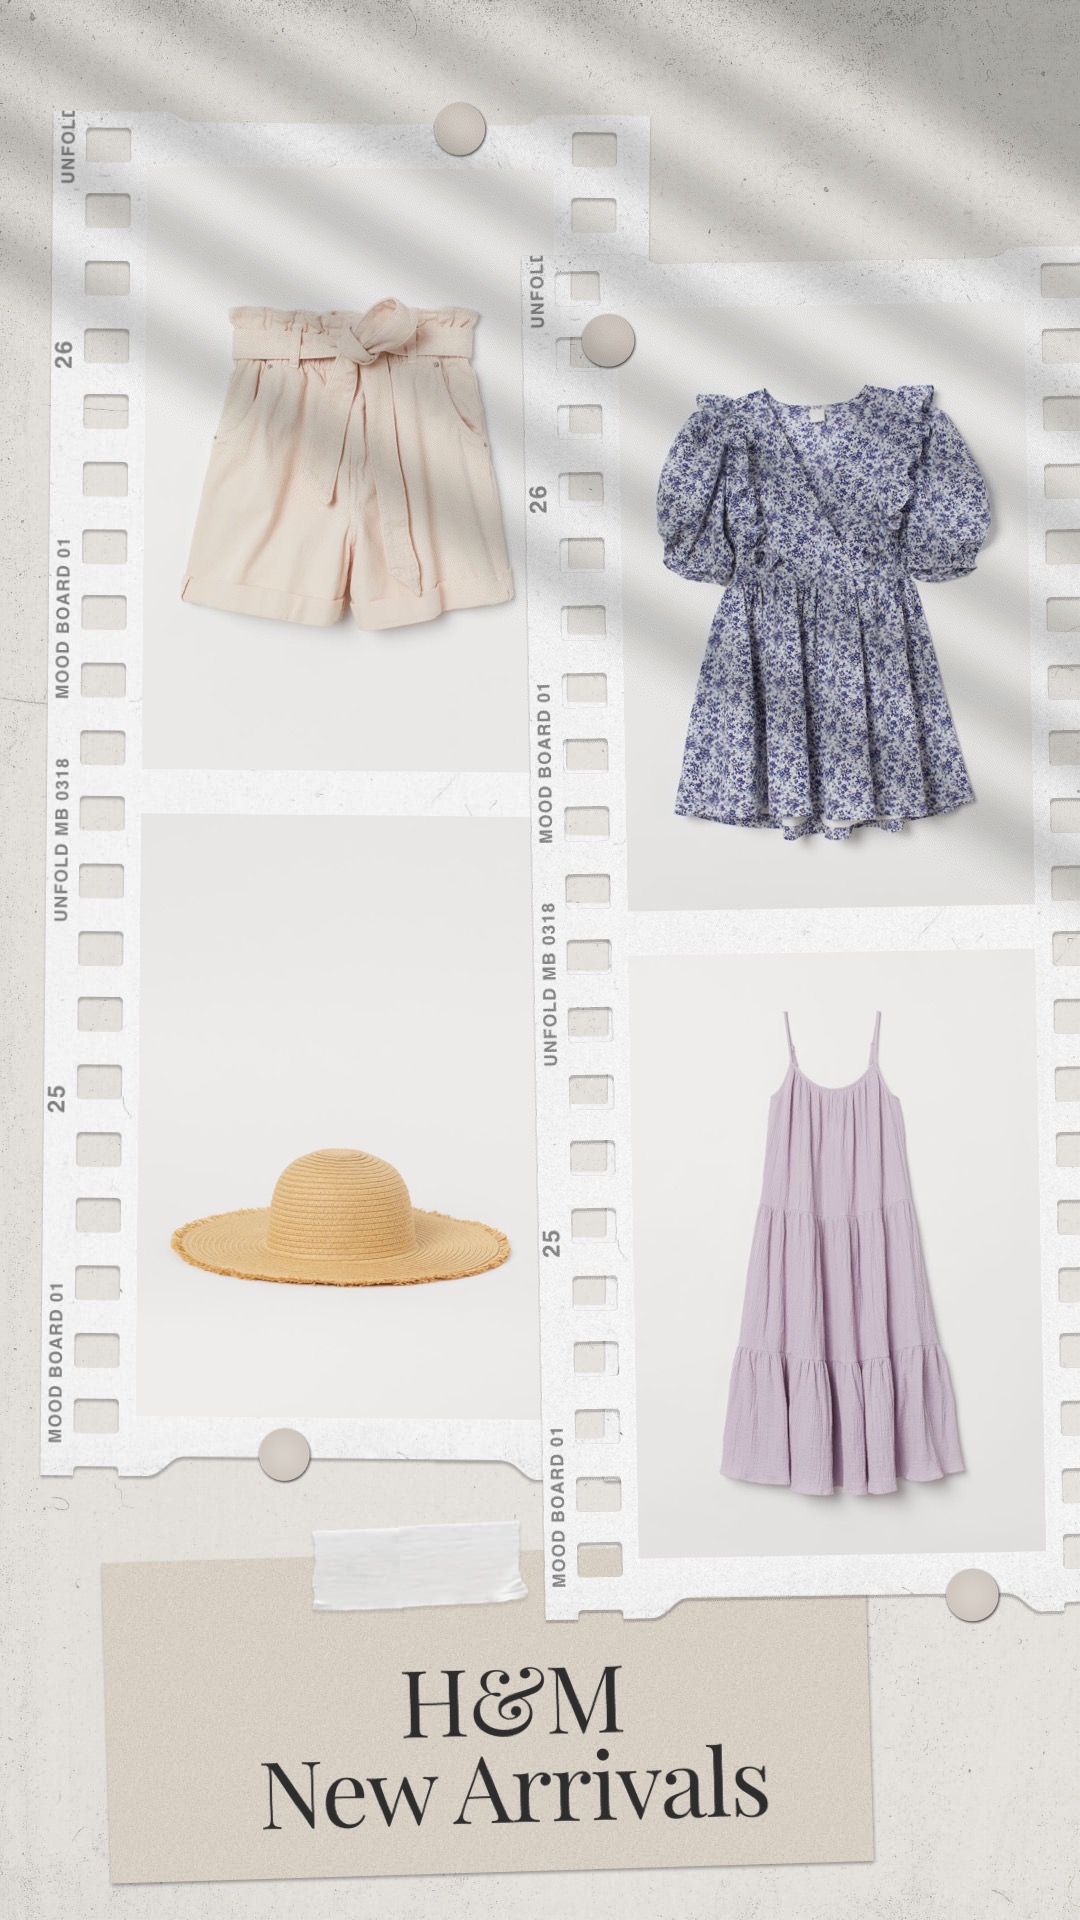 H&M Summer Collection 2020 - H&M New Arrivals 2020